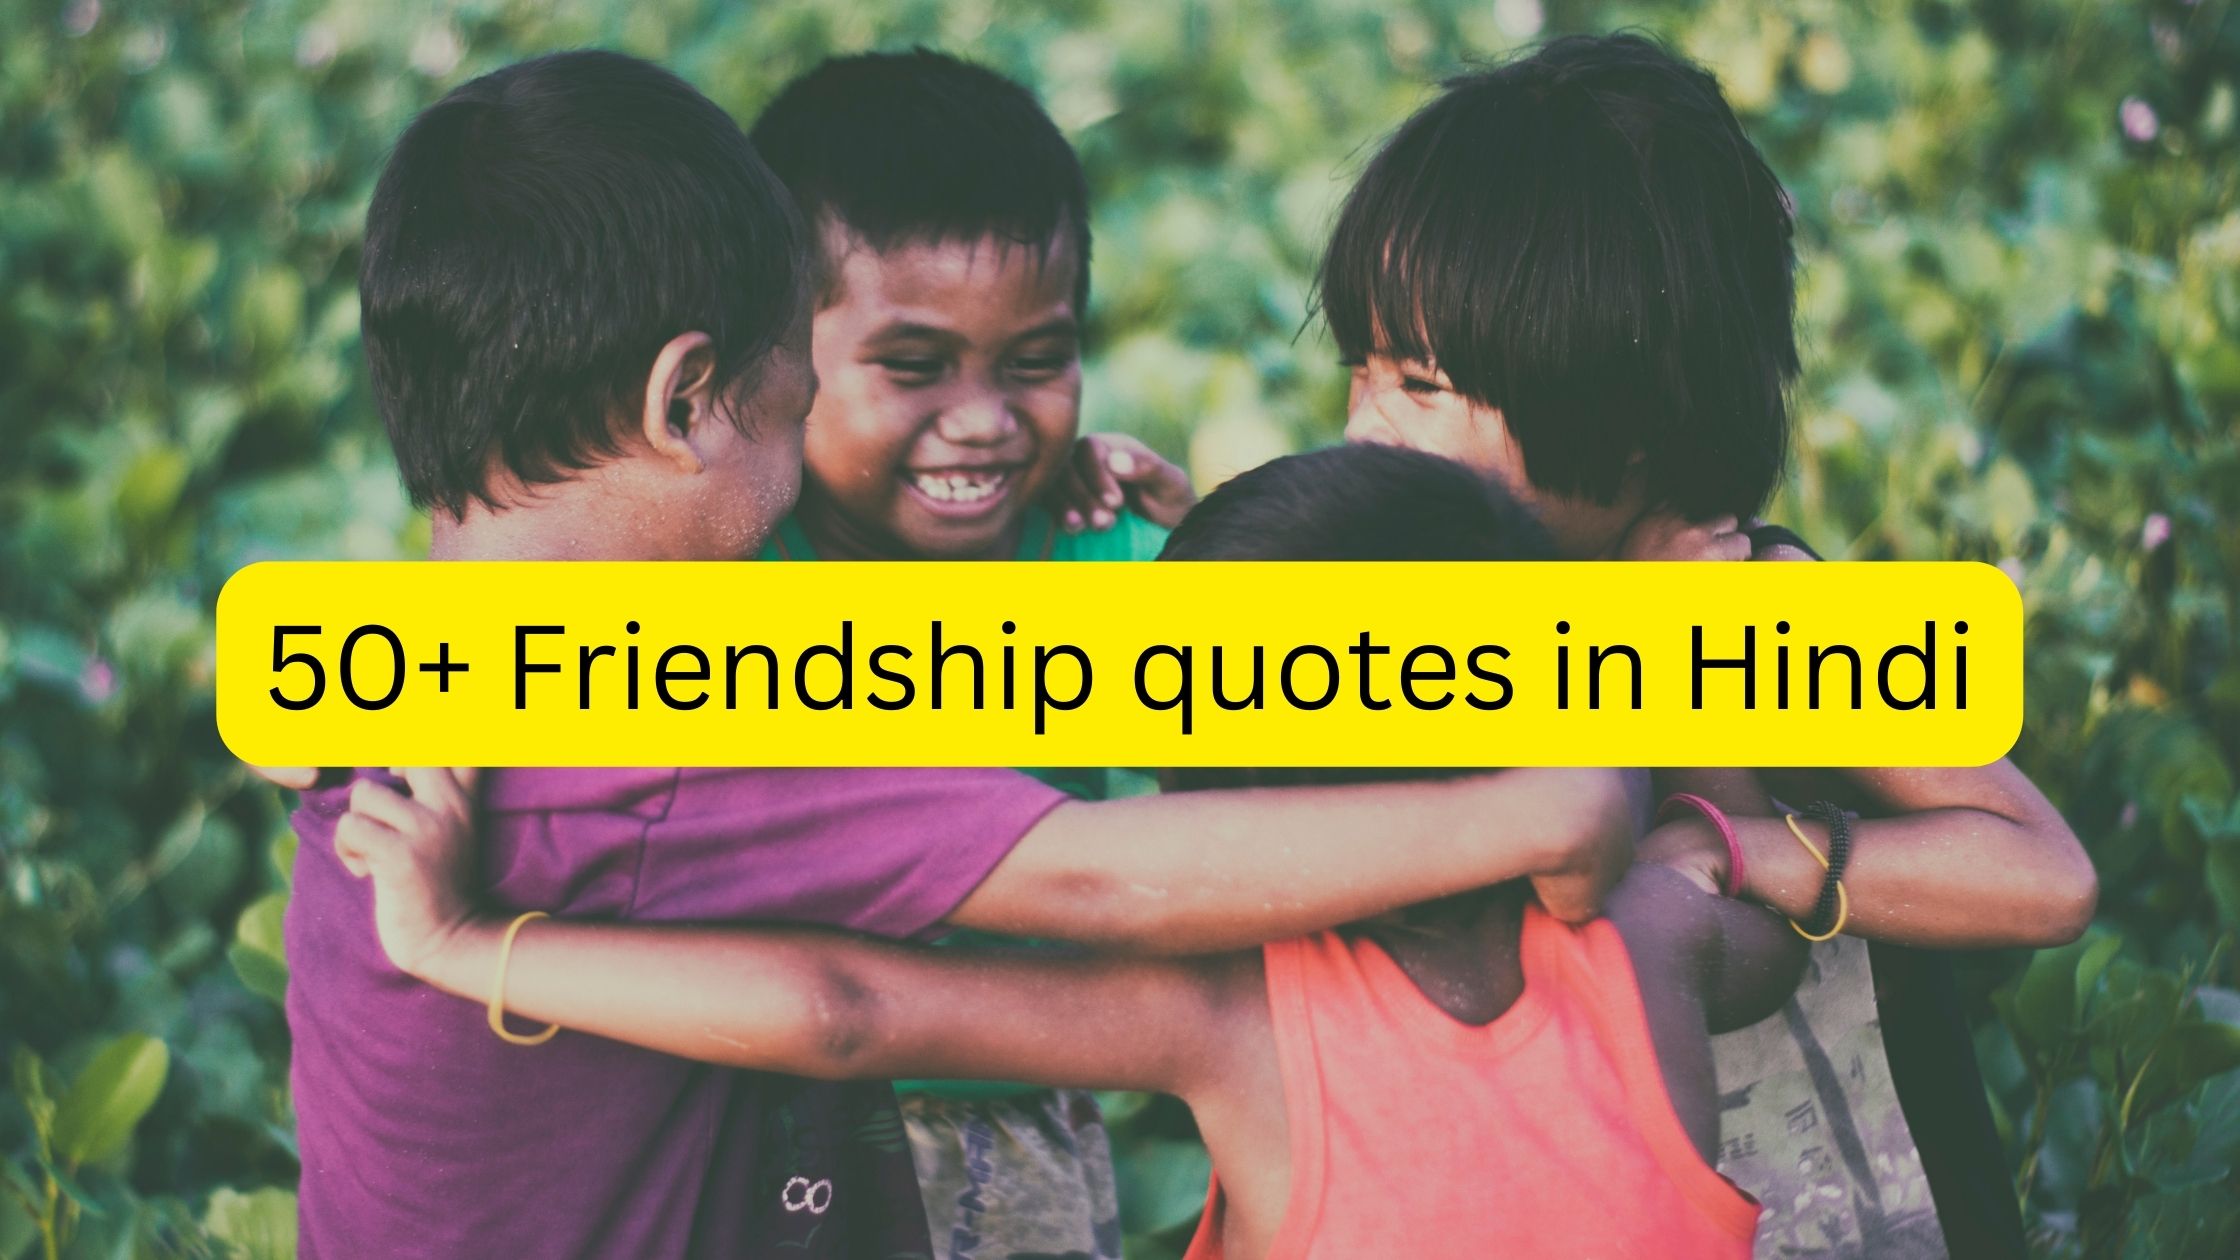 50+ Friendship quotes in Hindi